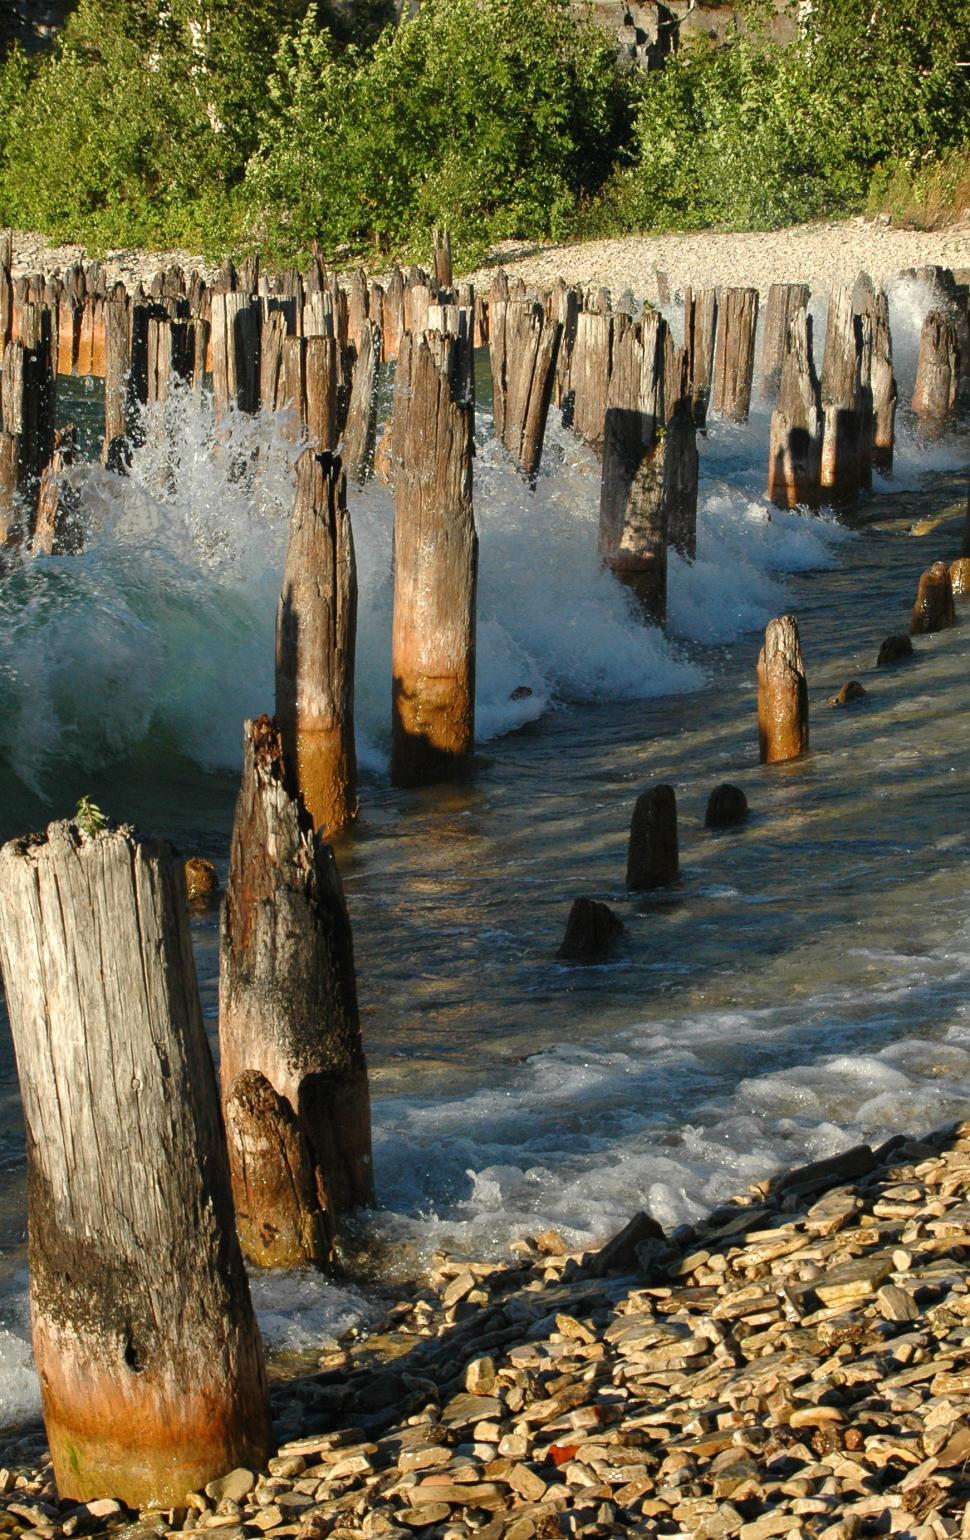 Free Image of Wooden Posts Emerging From Water 